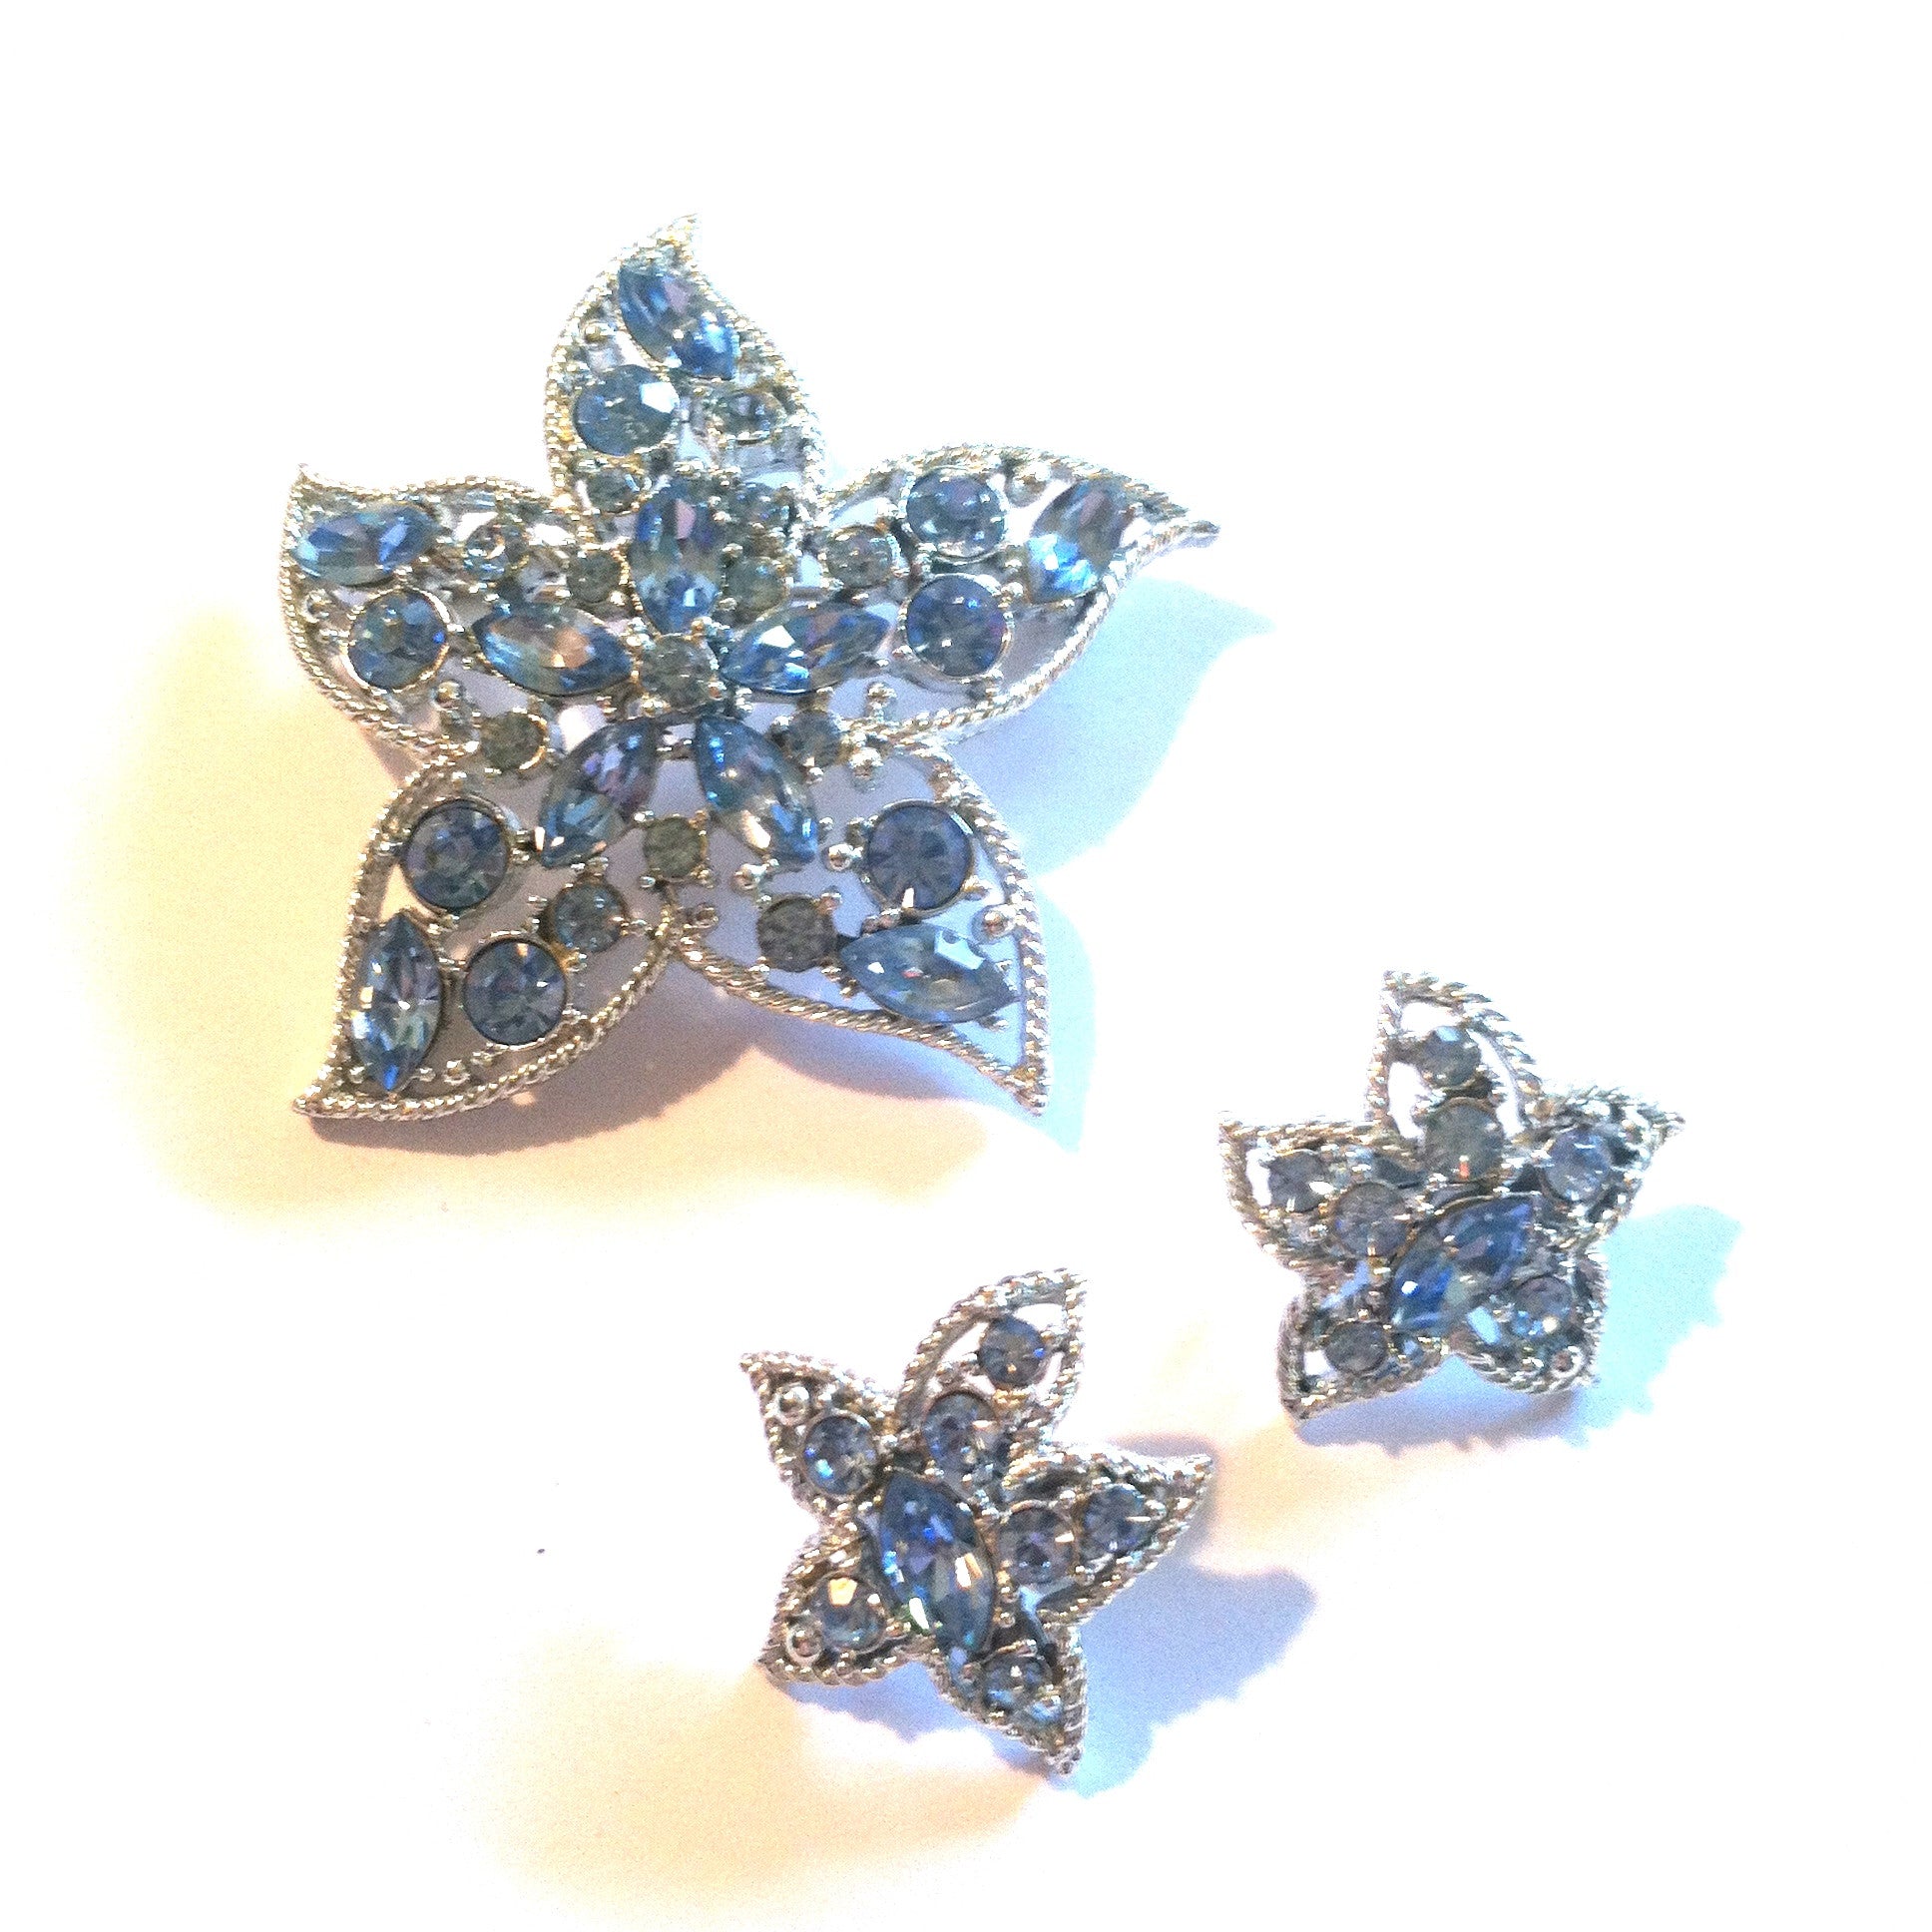 Star Fire Blue Rhinestone Brooch and Clip Earrings circa 1960s Dorothea's Closet Vintage Jewelry Sarah Coventry